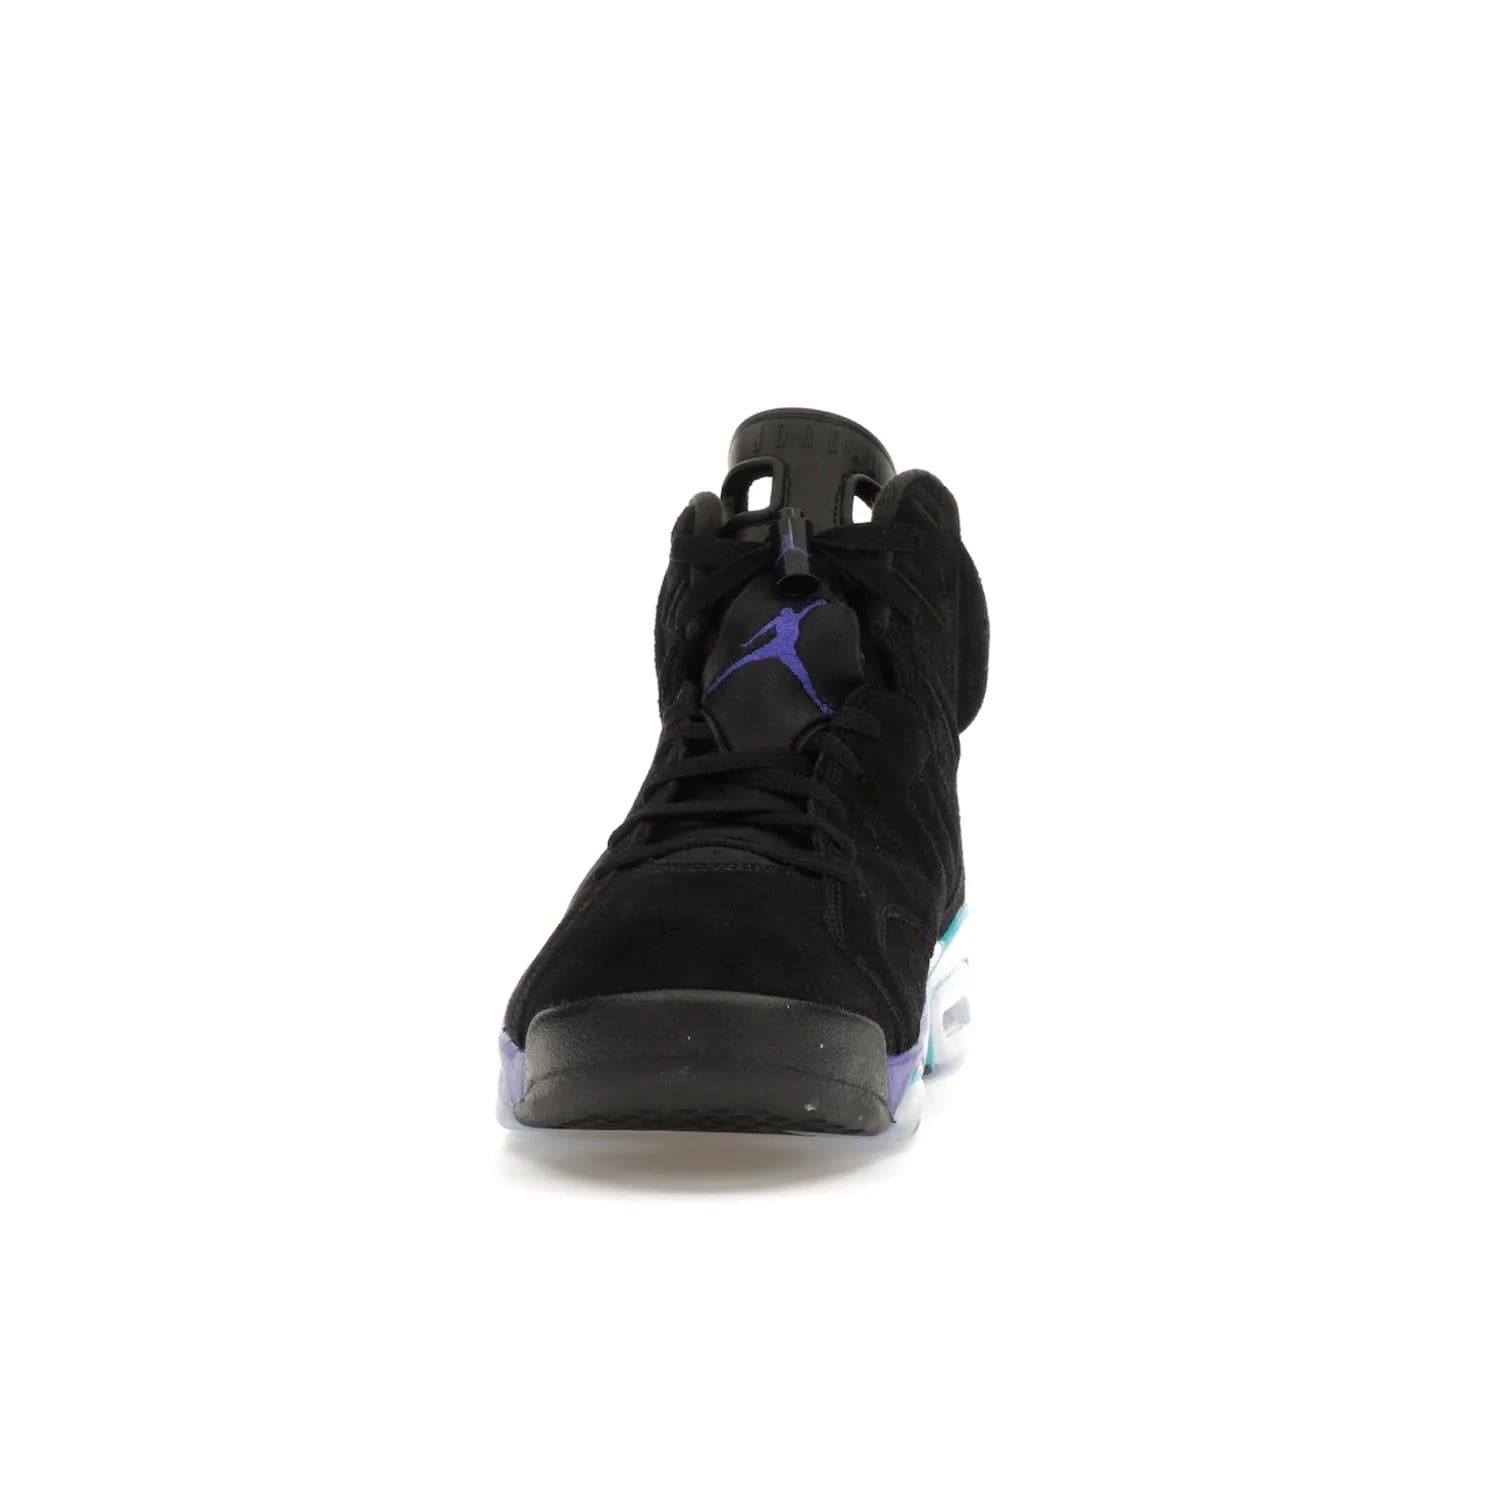 Jordan 6 Retro Aqua - Image 11 - Only at www.BallersClubKickz.com - Feel the classic Jordan 6 Retro Aqua paired with modern style. Black, Bright Concord, and Aquatone hues are crafted with a supple suede and rubberized heel tab. This standout sneaker adds signature Jordan elements at $200. Elevate your style with the Jordan 6 Retro Aqua.